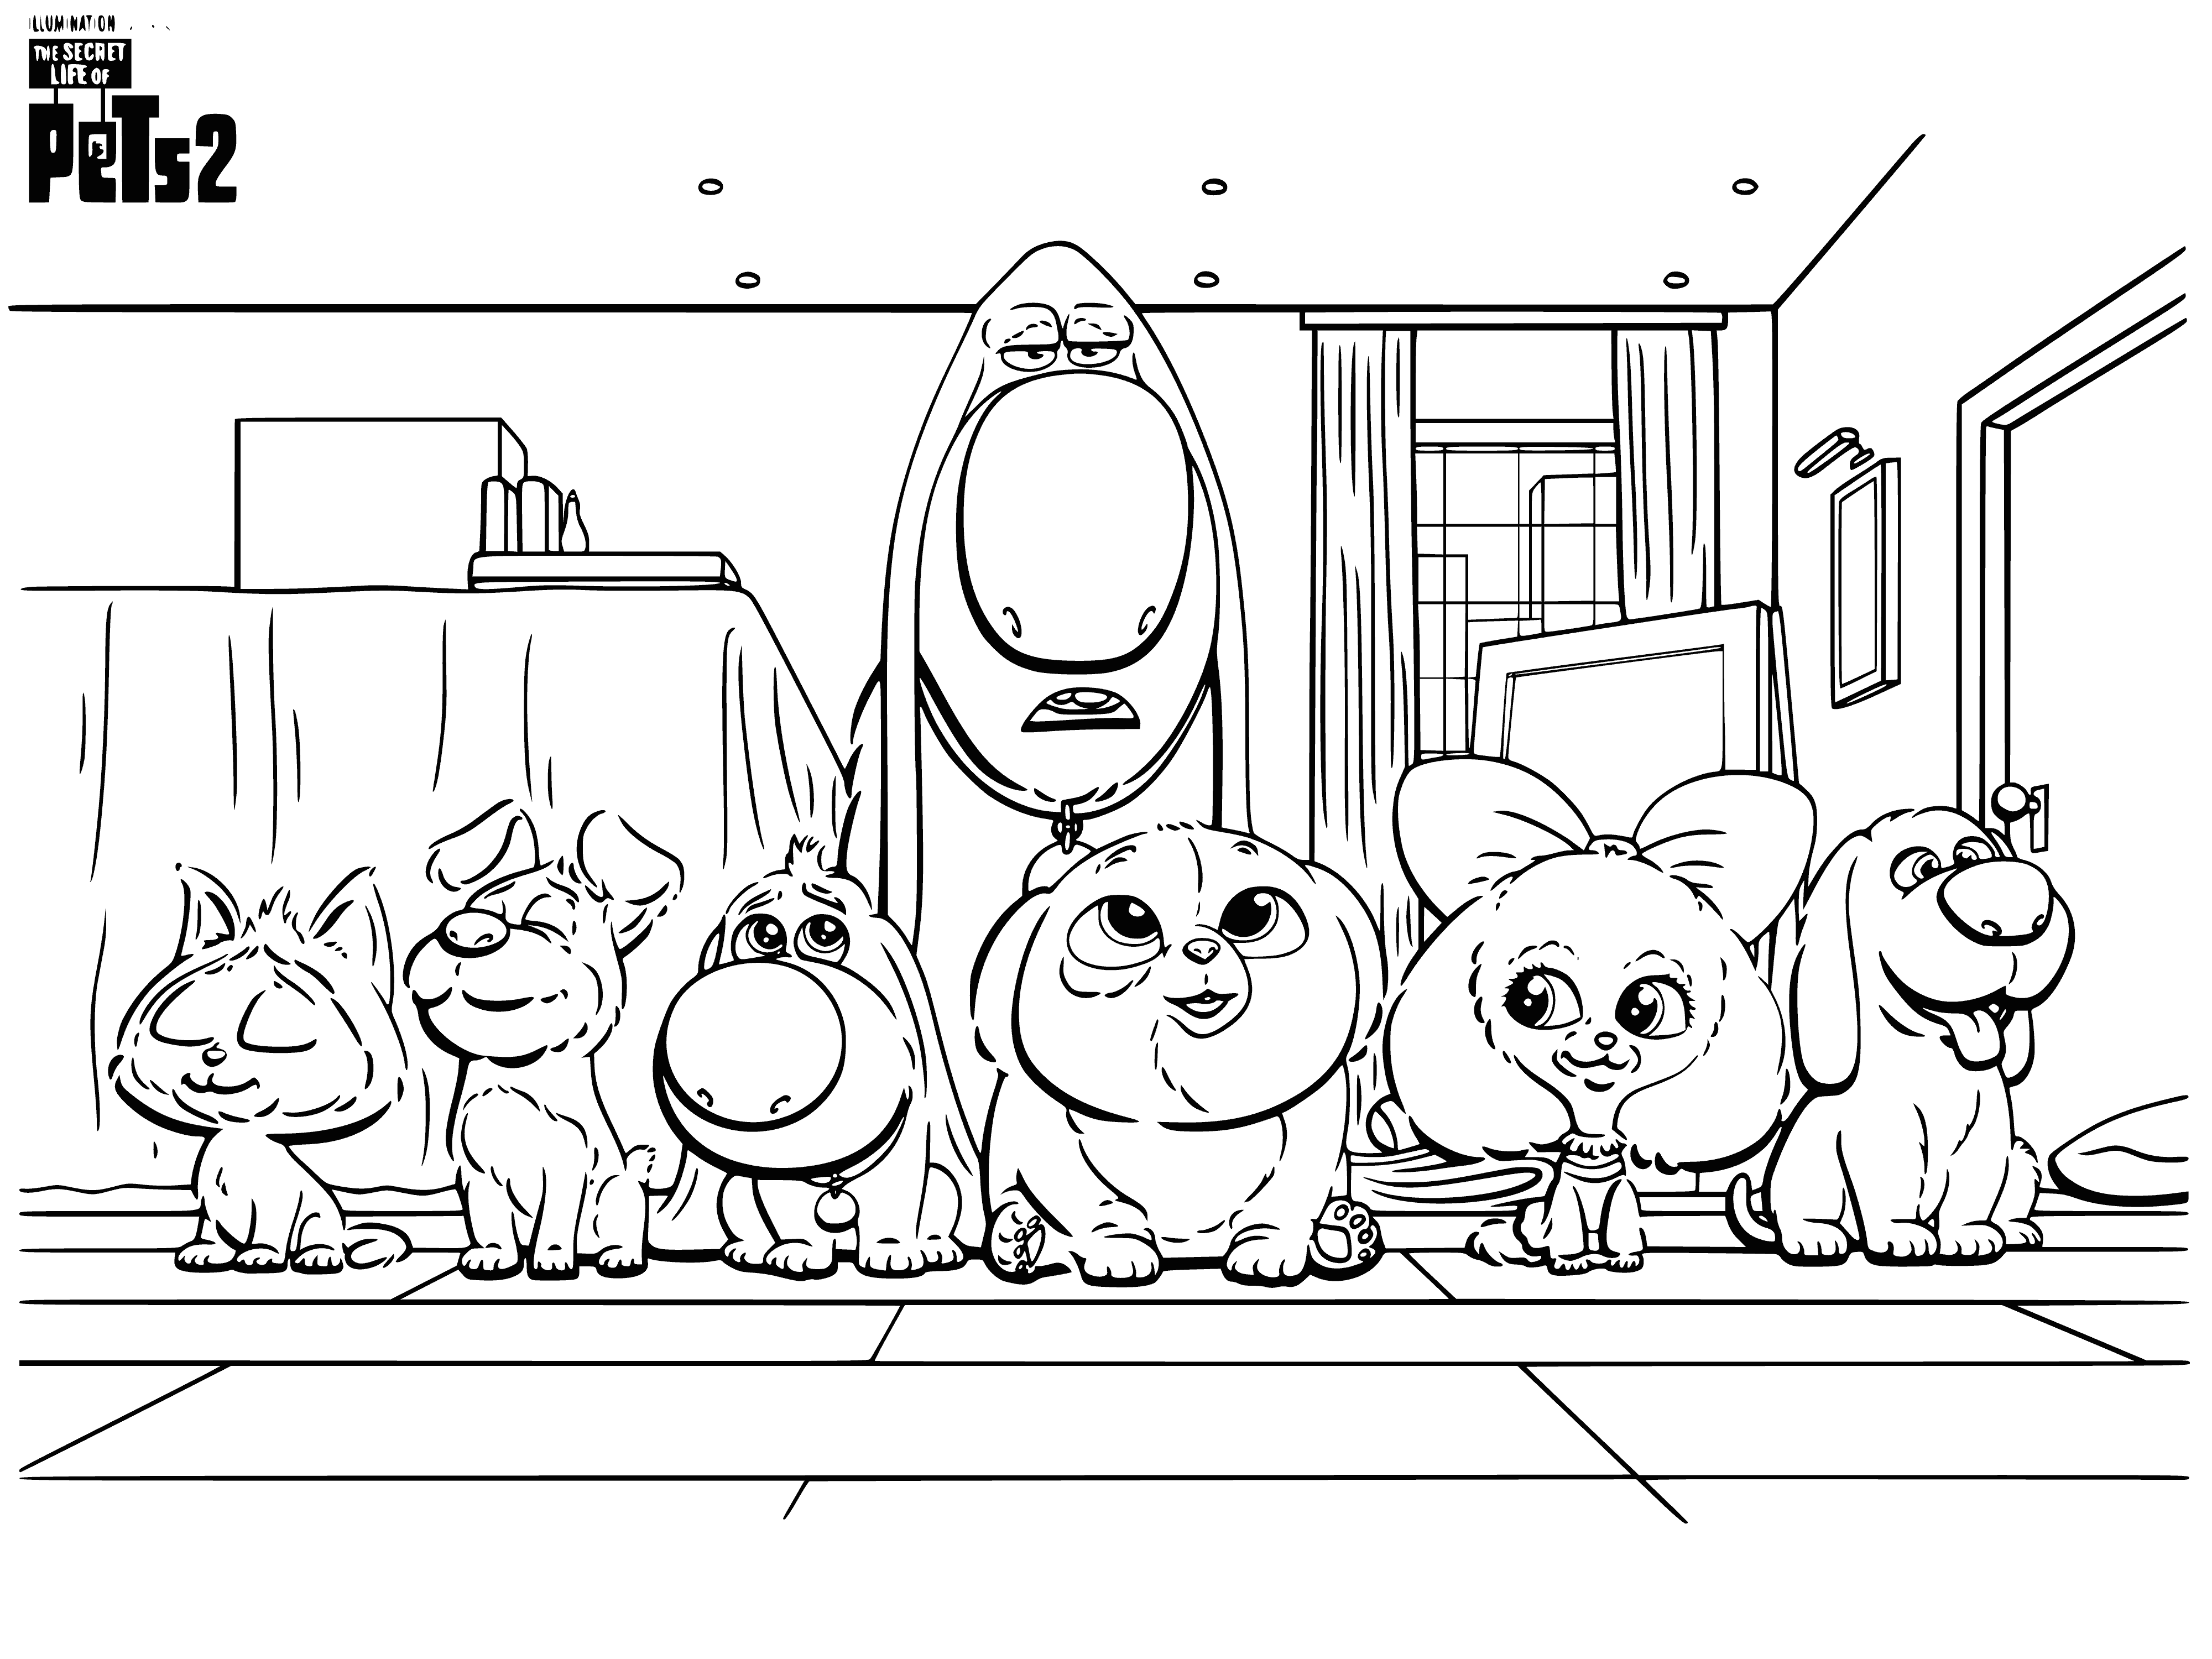 The Secret Life of Pets 2 coloring page